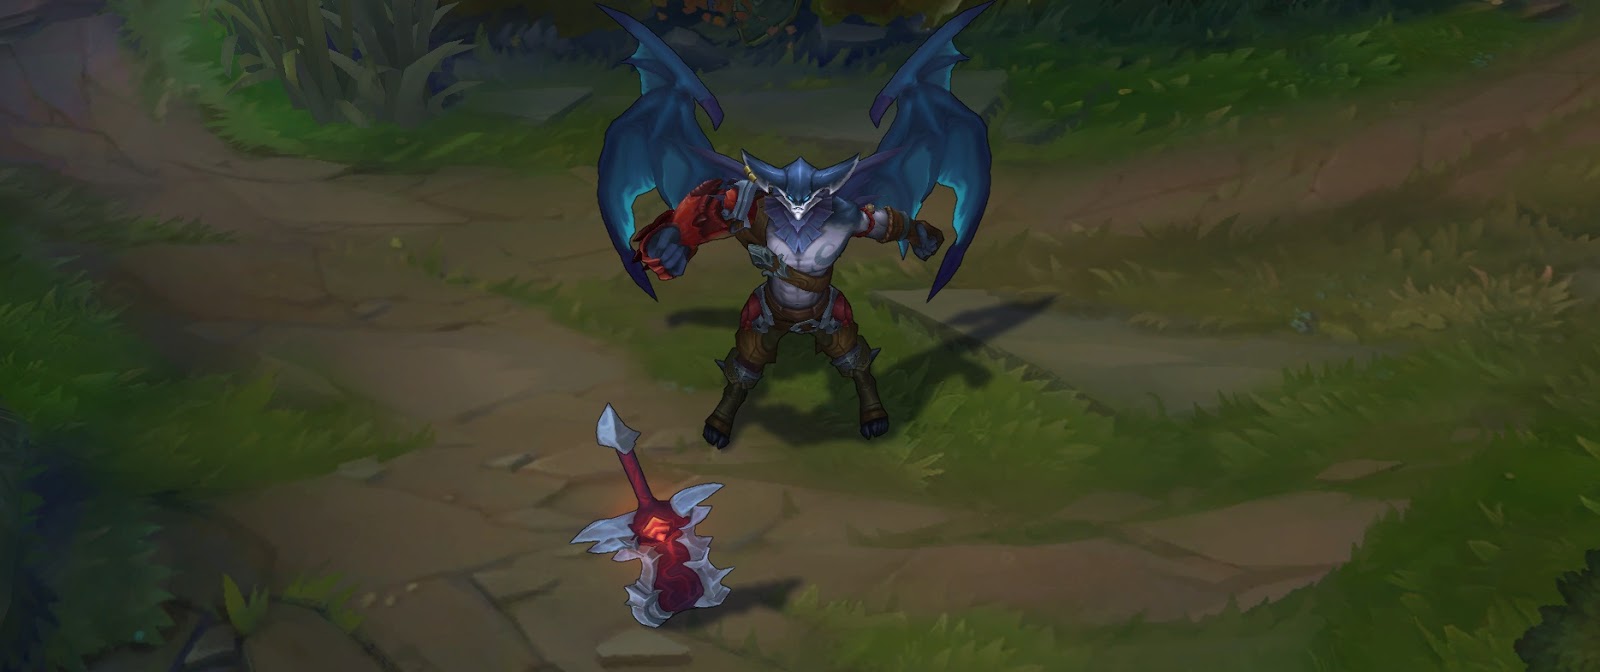 sea hunter aatrox skin for league of legends ingame picture